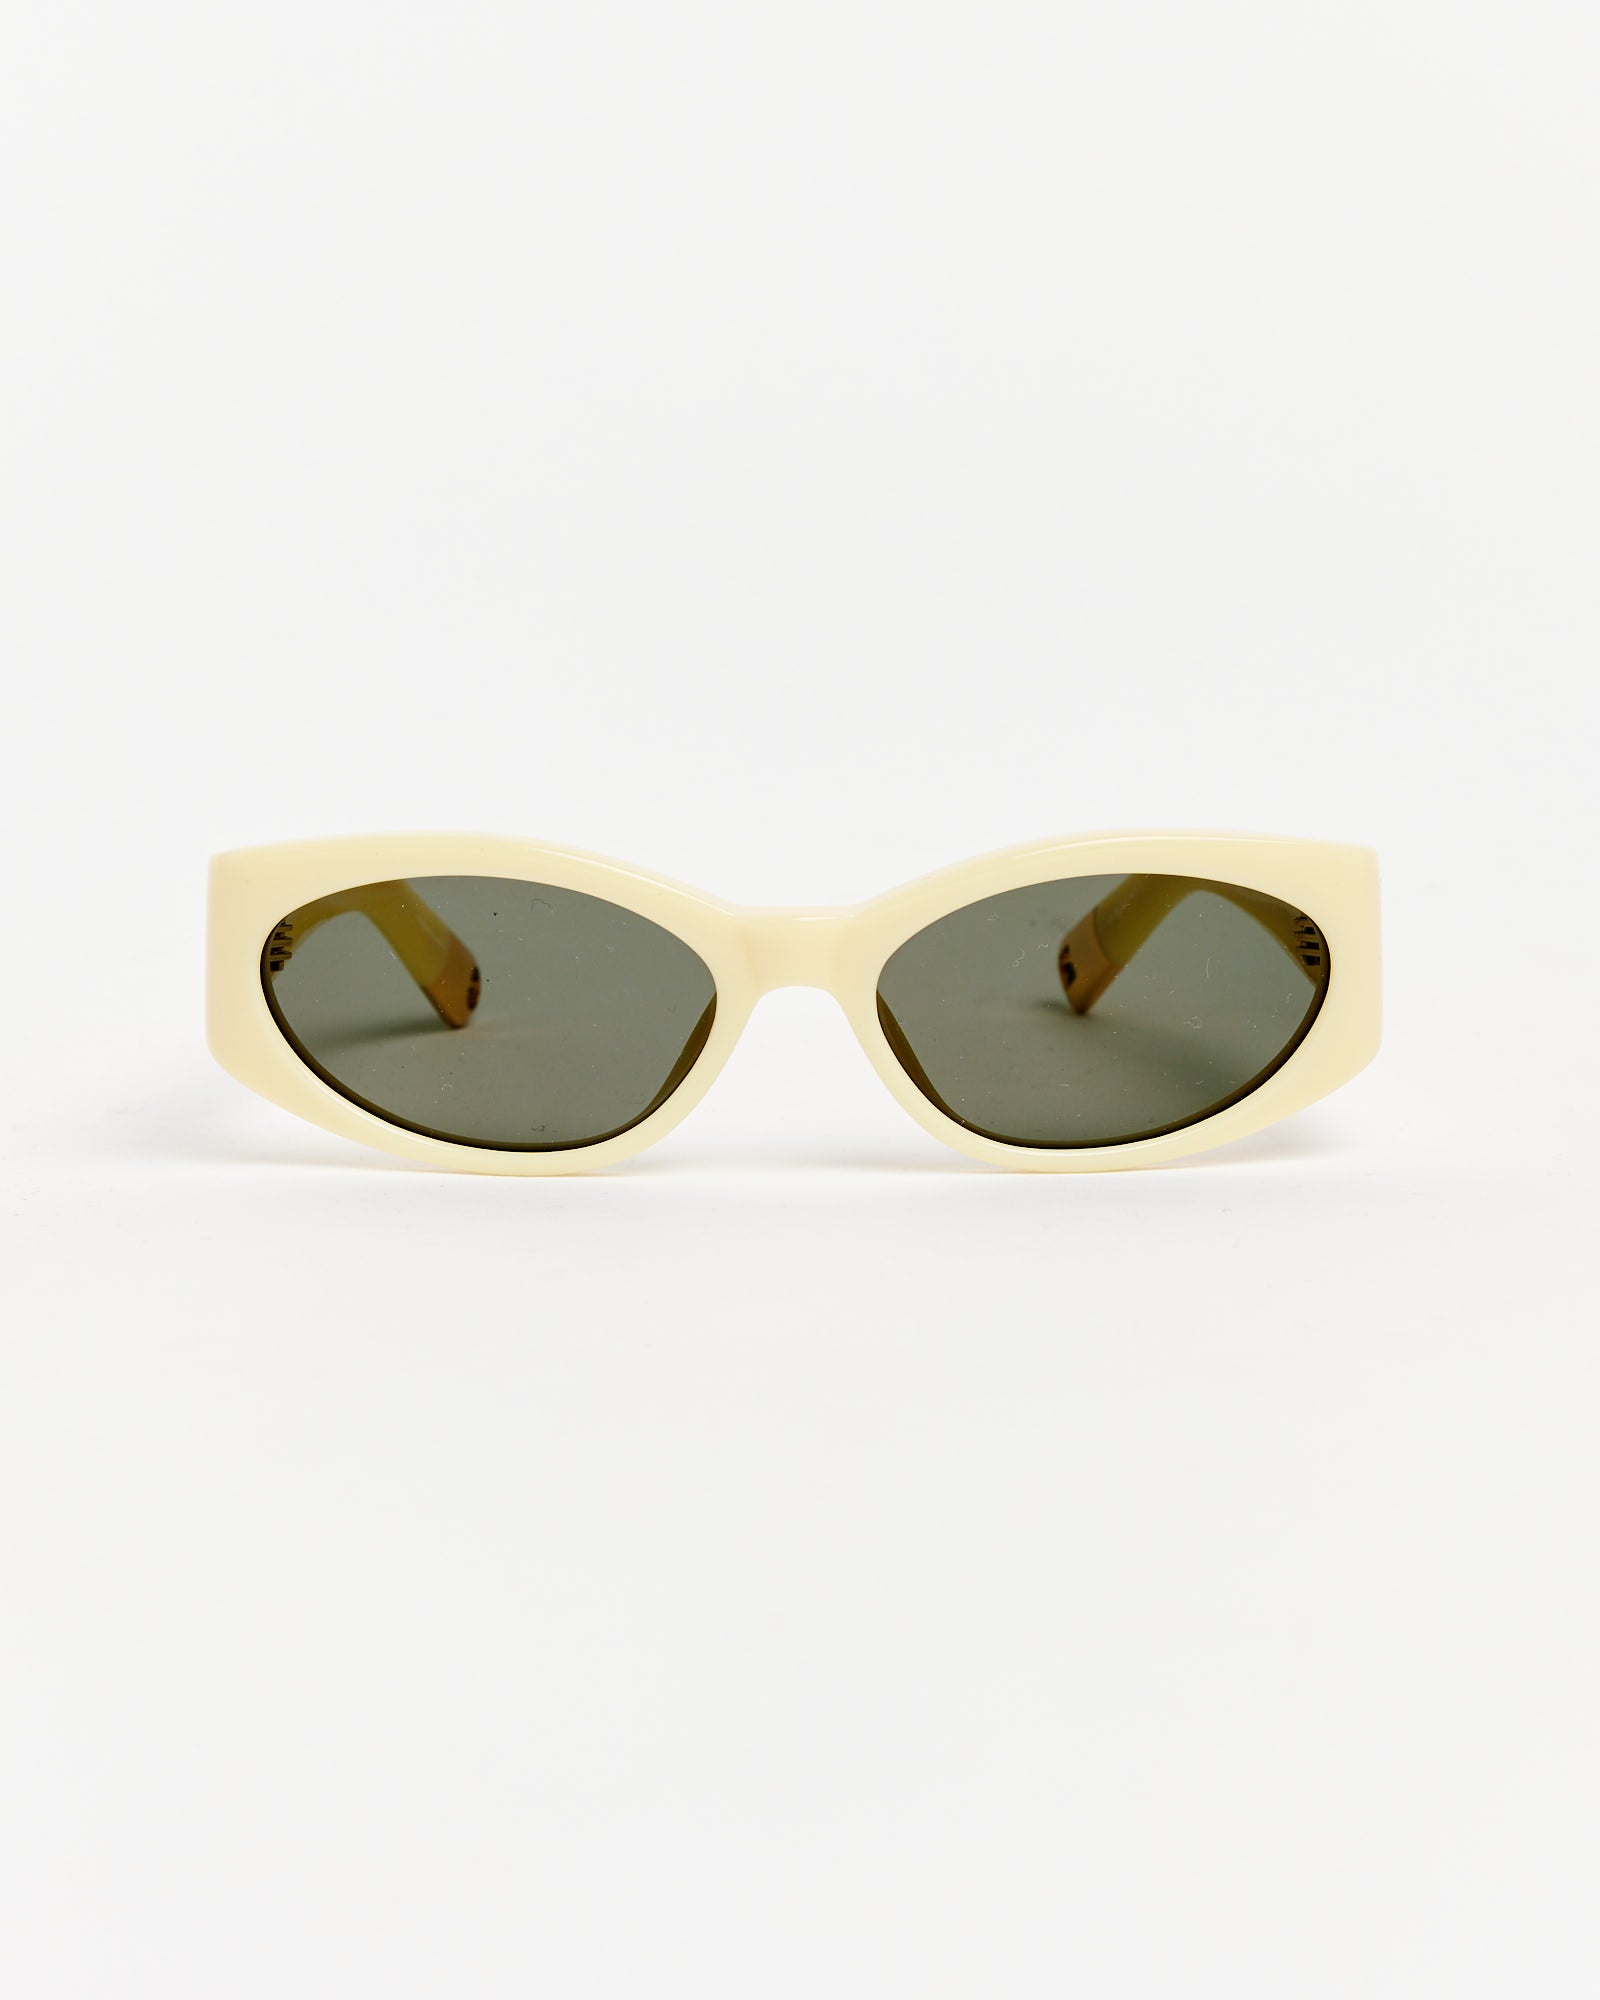 Les Lunettes Ovalo Sunglasses in Pale Yellow